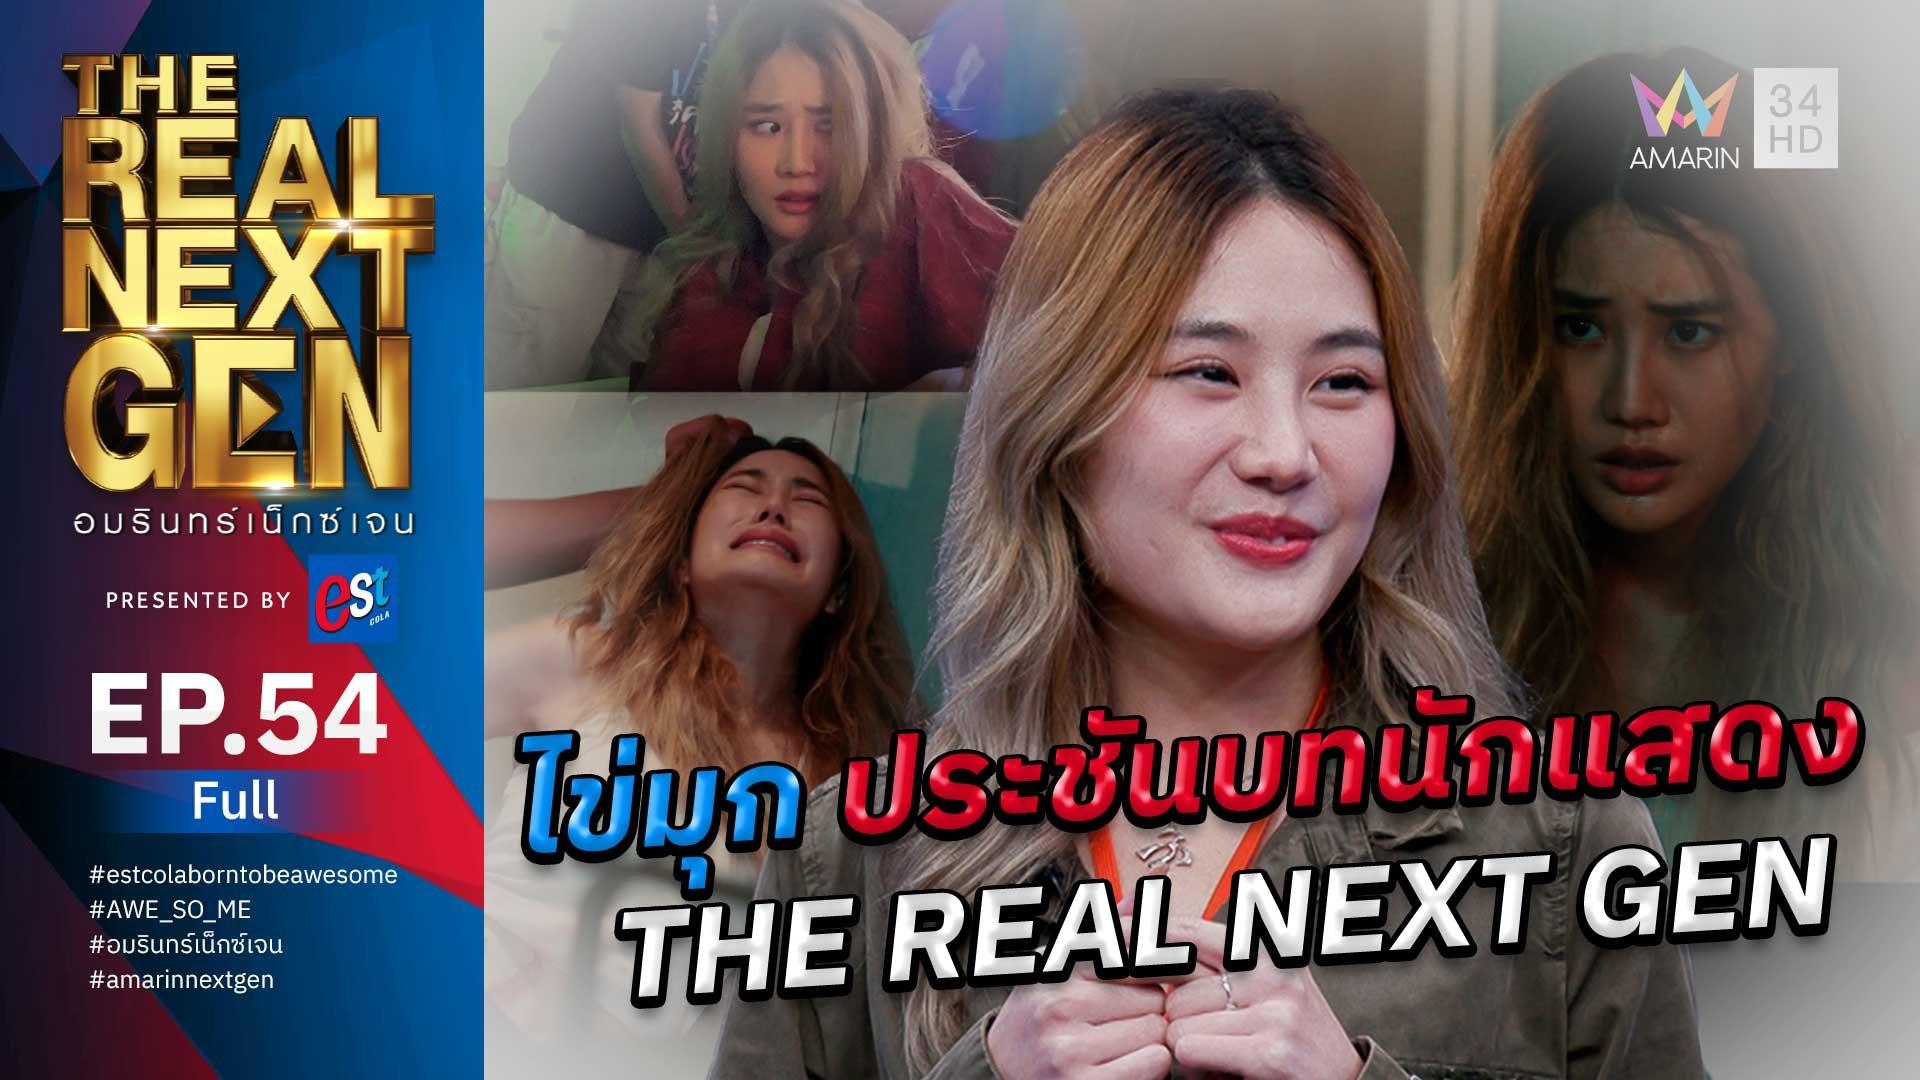 The Real Next Gen อมรินทร์เน็กซ์เจน | EP.54 THE REAL NEXT GEN อมรินทร์เน็กซ์เจน Presented By est cola  | 30 พ.ย. 66 | AMARIN TVHD34